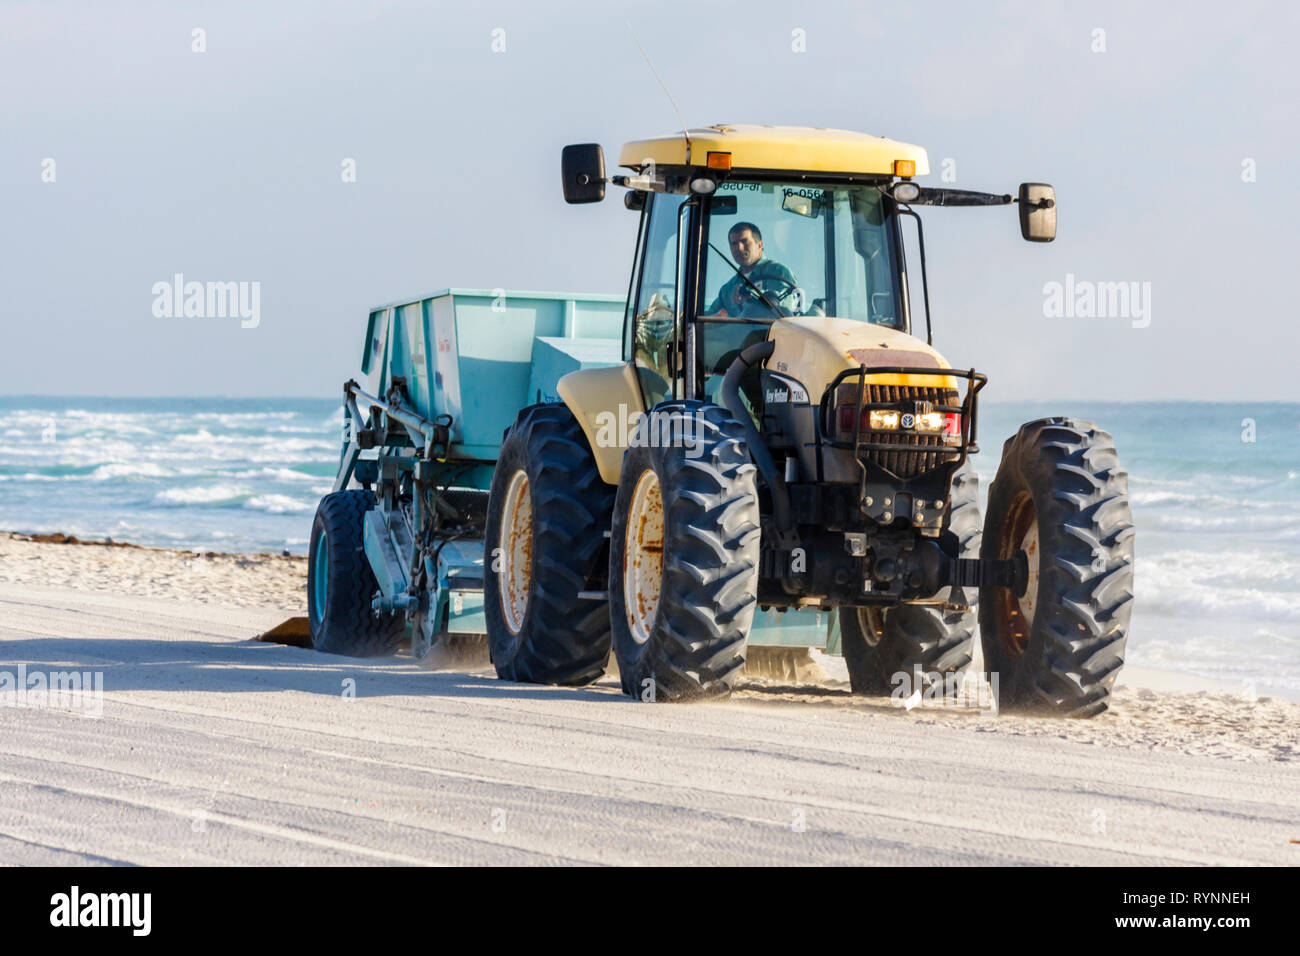 Miami Beach Florida,Atlantic Ocean,water,public beach,cleaning,cleaner,tractor,pulling,machine,sift,sand,litter,city,employee worker workers working s Stock Photo